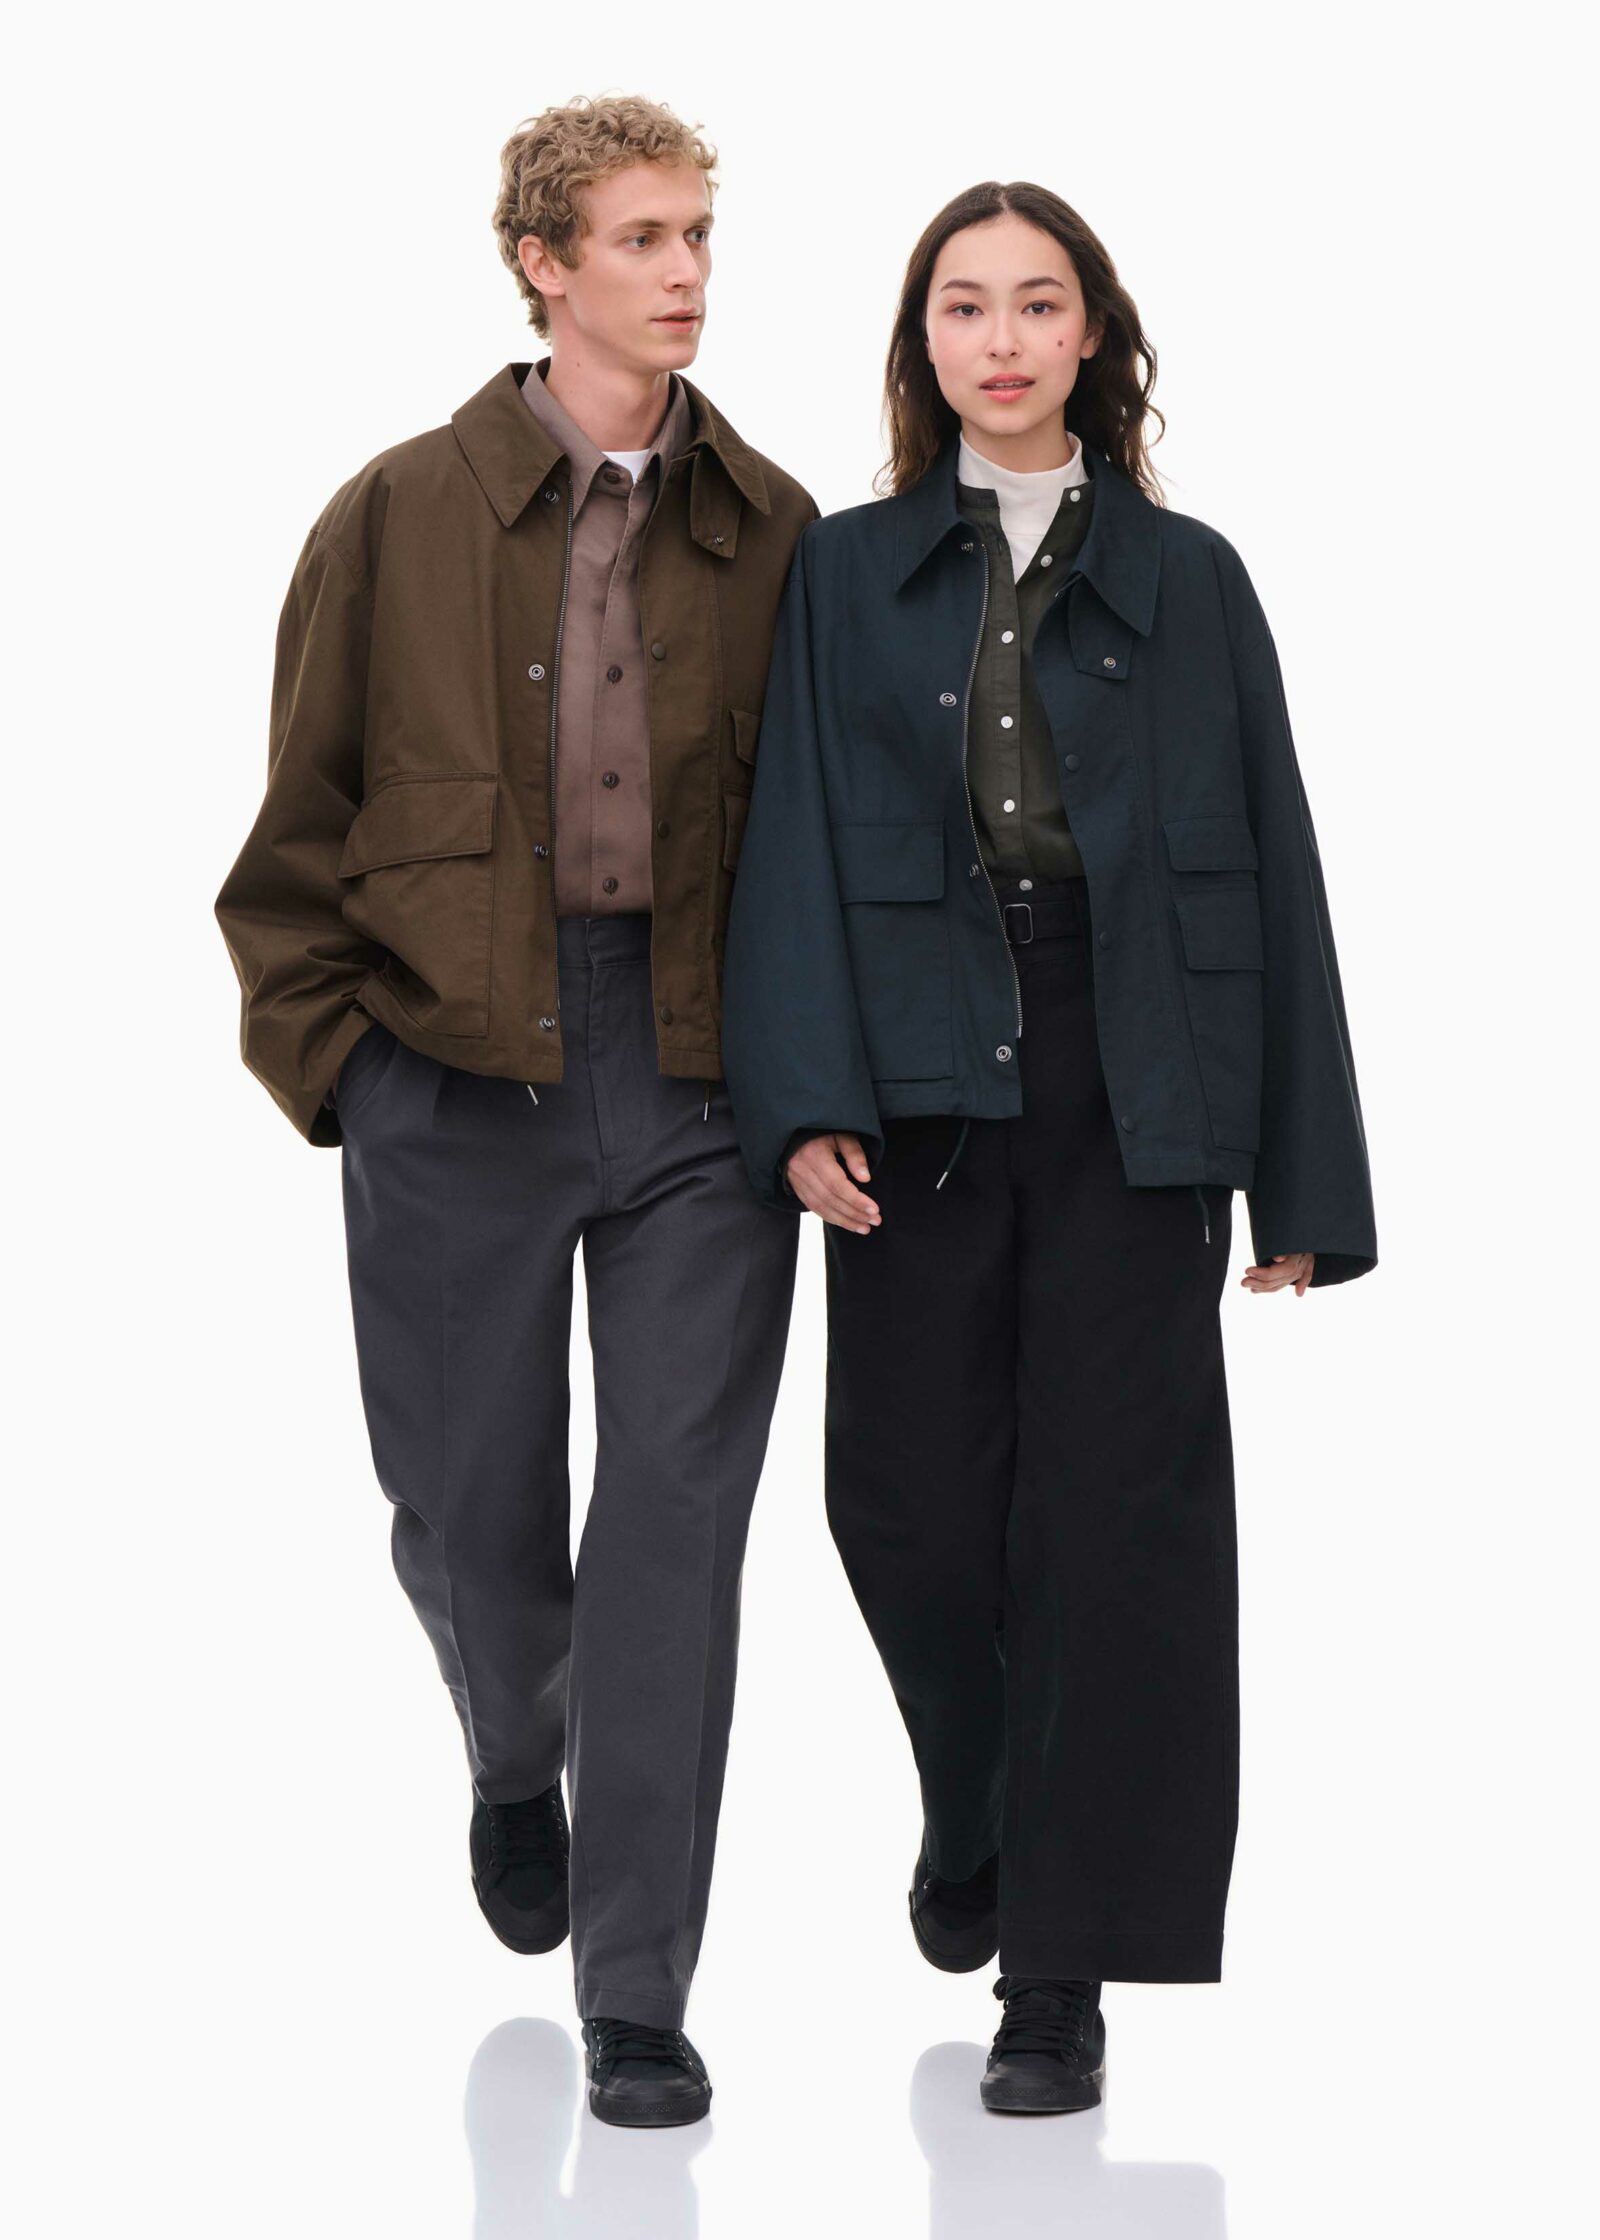 No Excess Baggage UNIQLO’s New Collection Is Lowkey And Lightweight